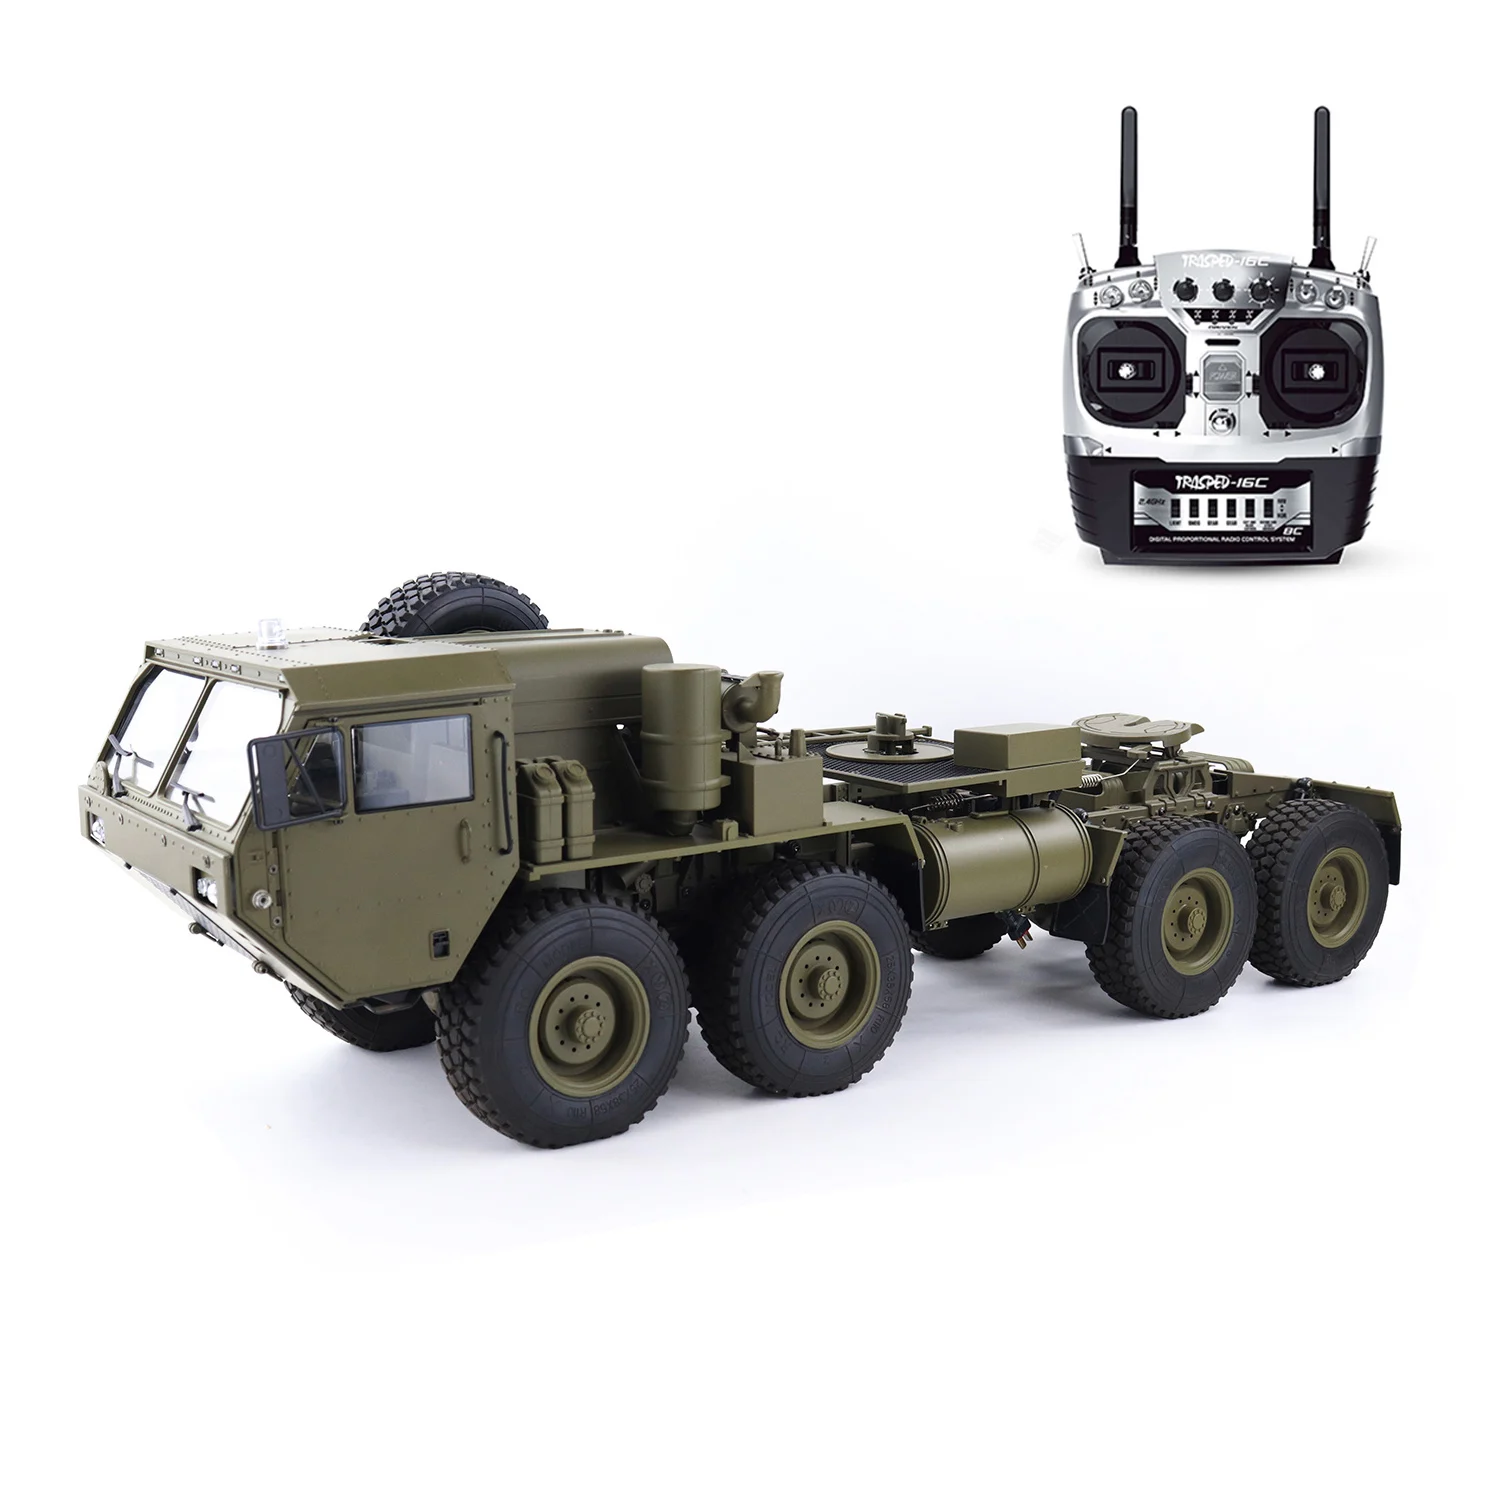 HG 1/12 U.S Military Truck P802 8X8 Chassis RC Car Model KIT to build for  Adults ESC Motor Servo Radio Toys Gifts TH19840-SMT6